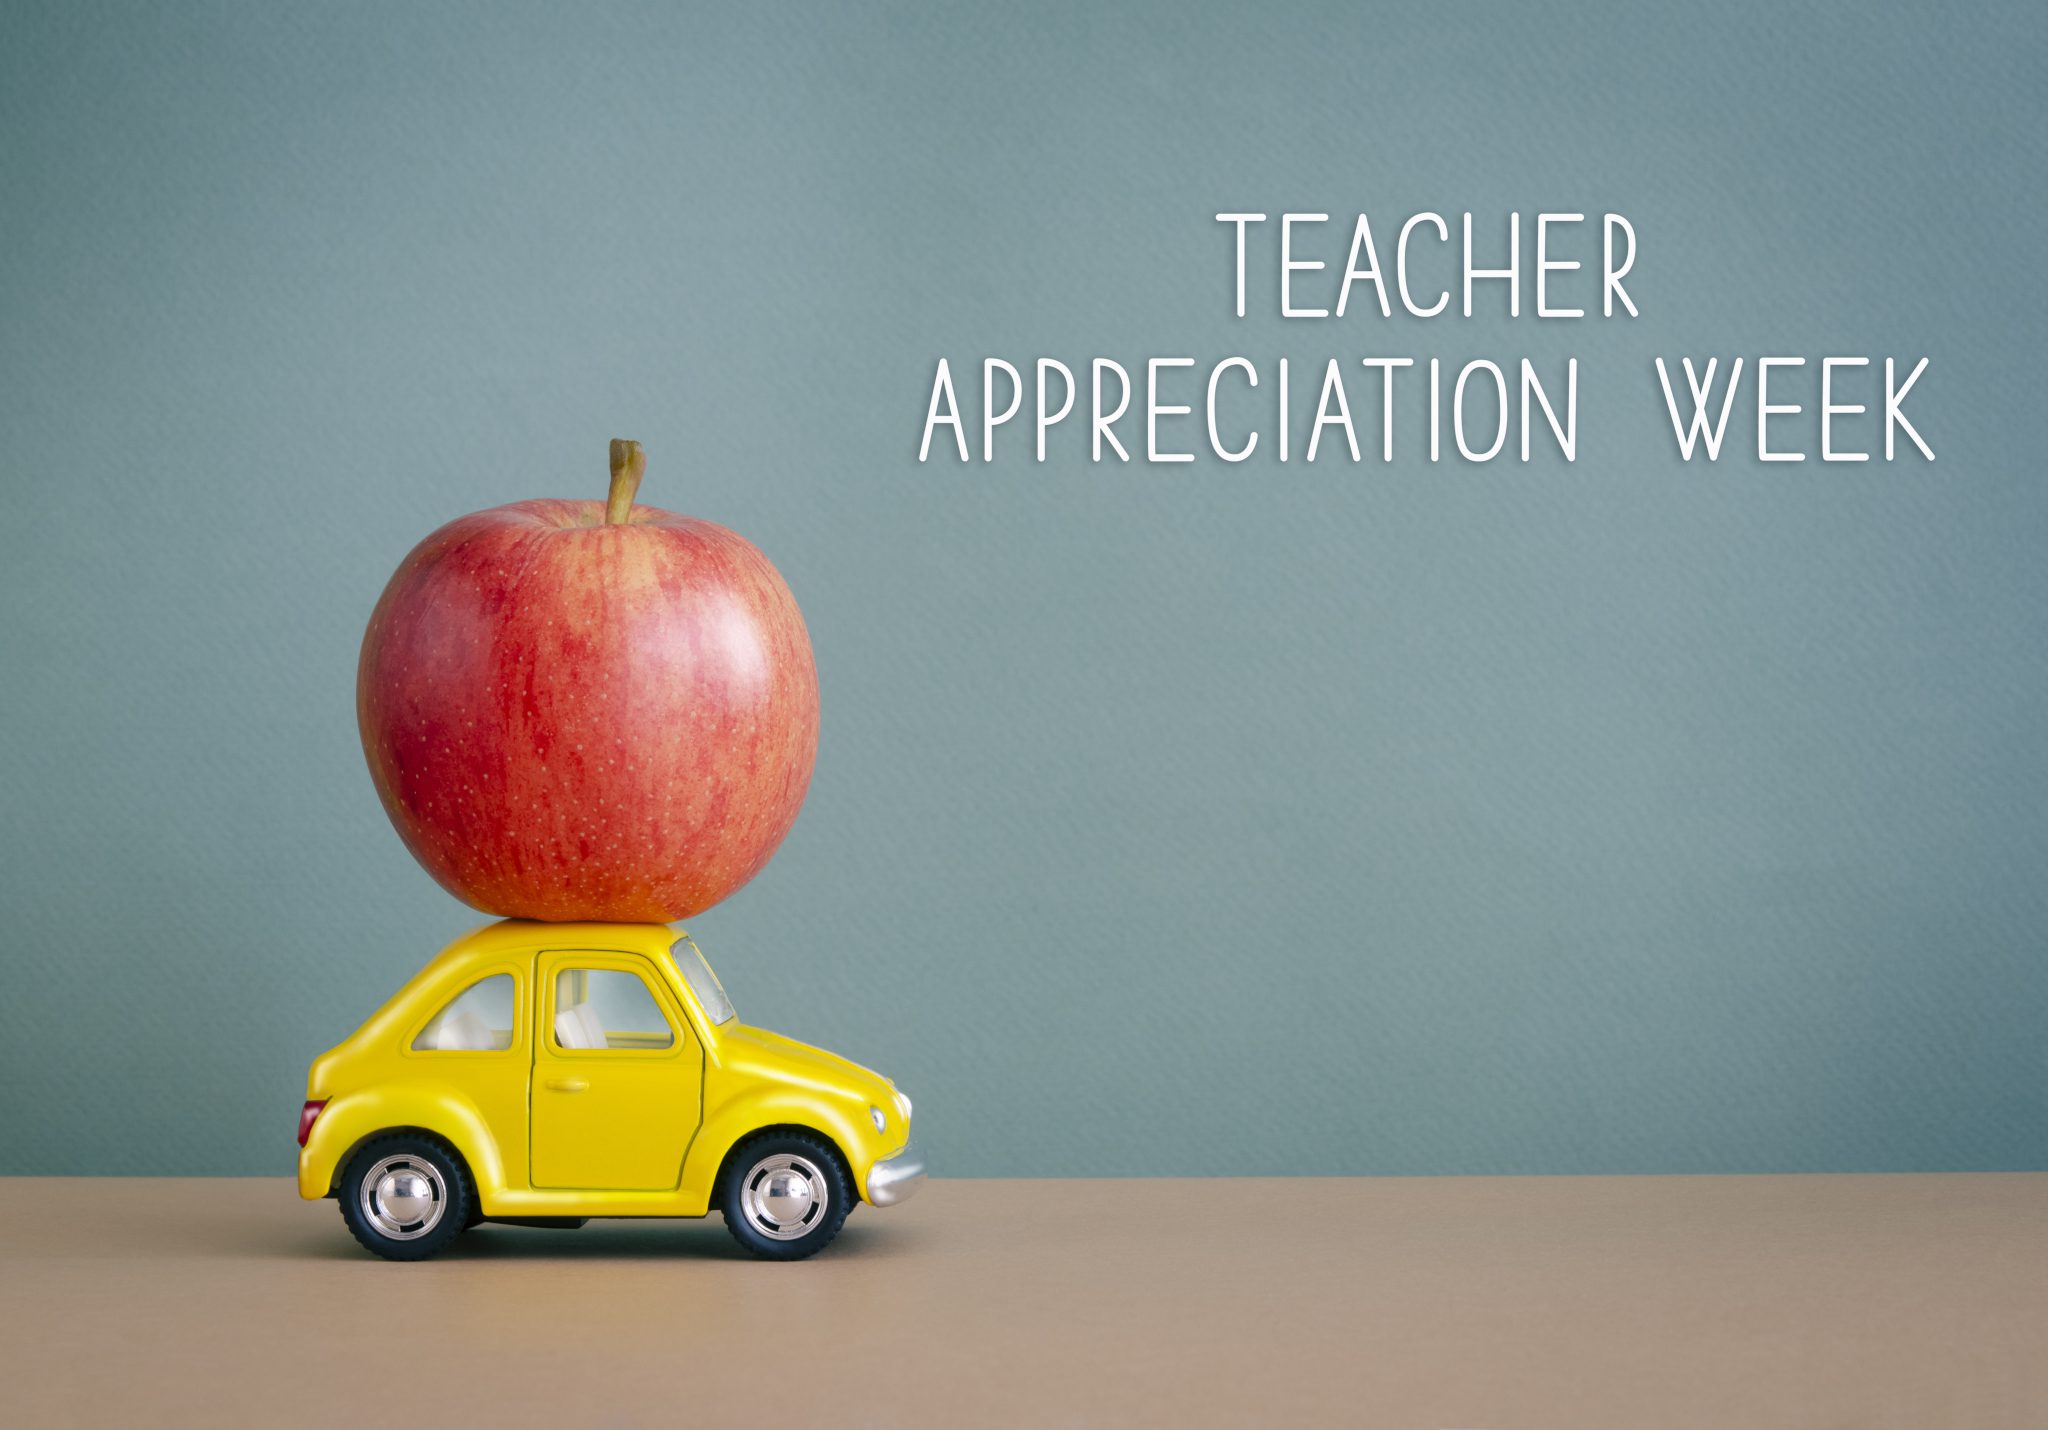 Discussions on education for Teacher Appreciation Week